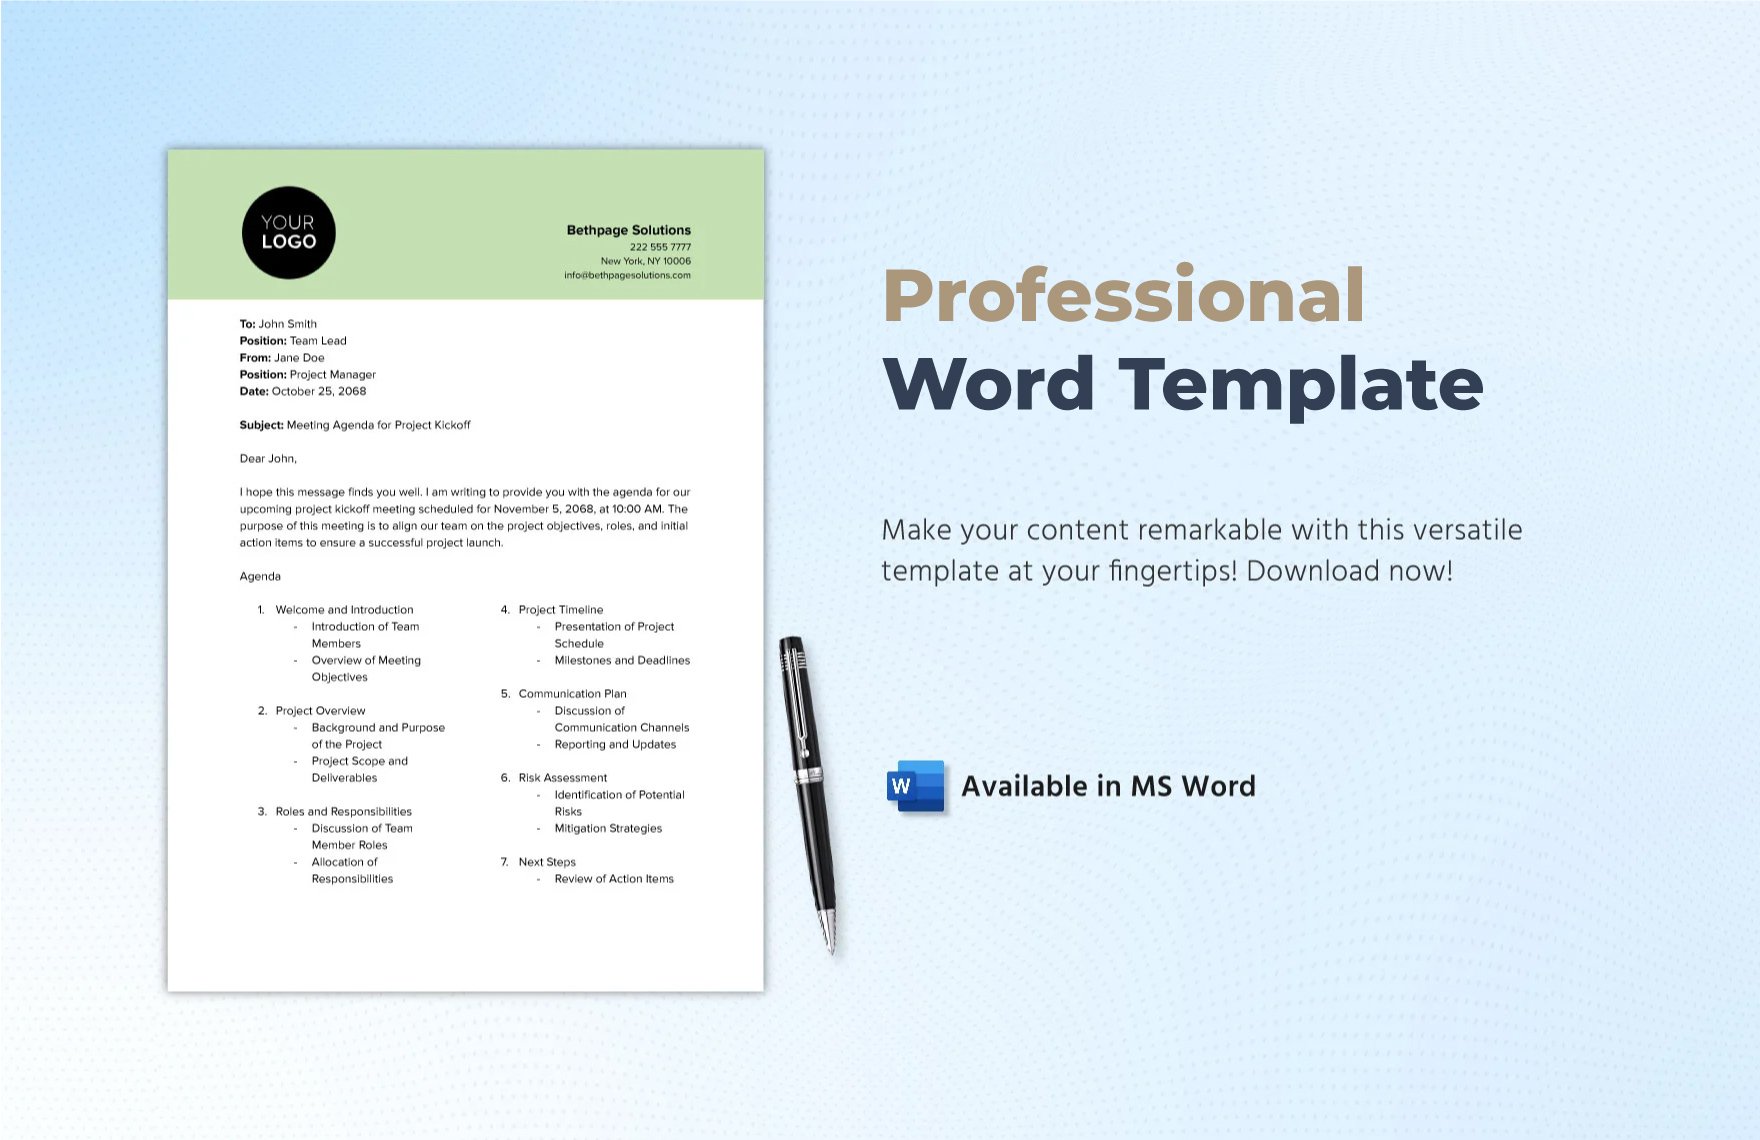 Professional Word Template